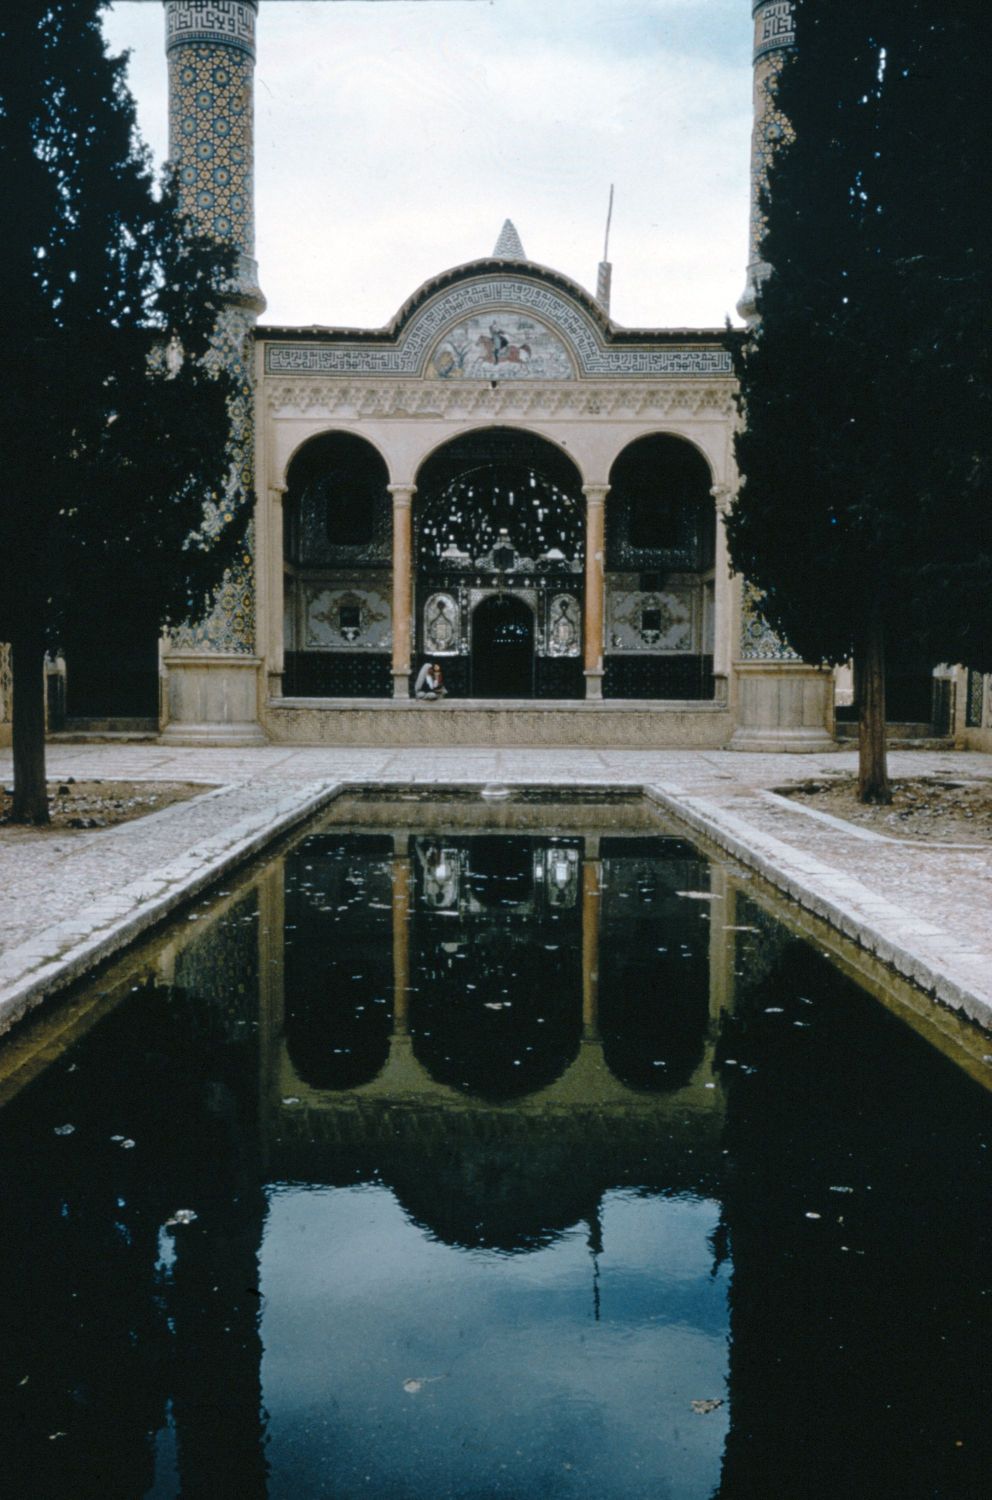 View of courtyard and reflecting pool.